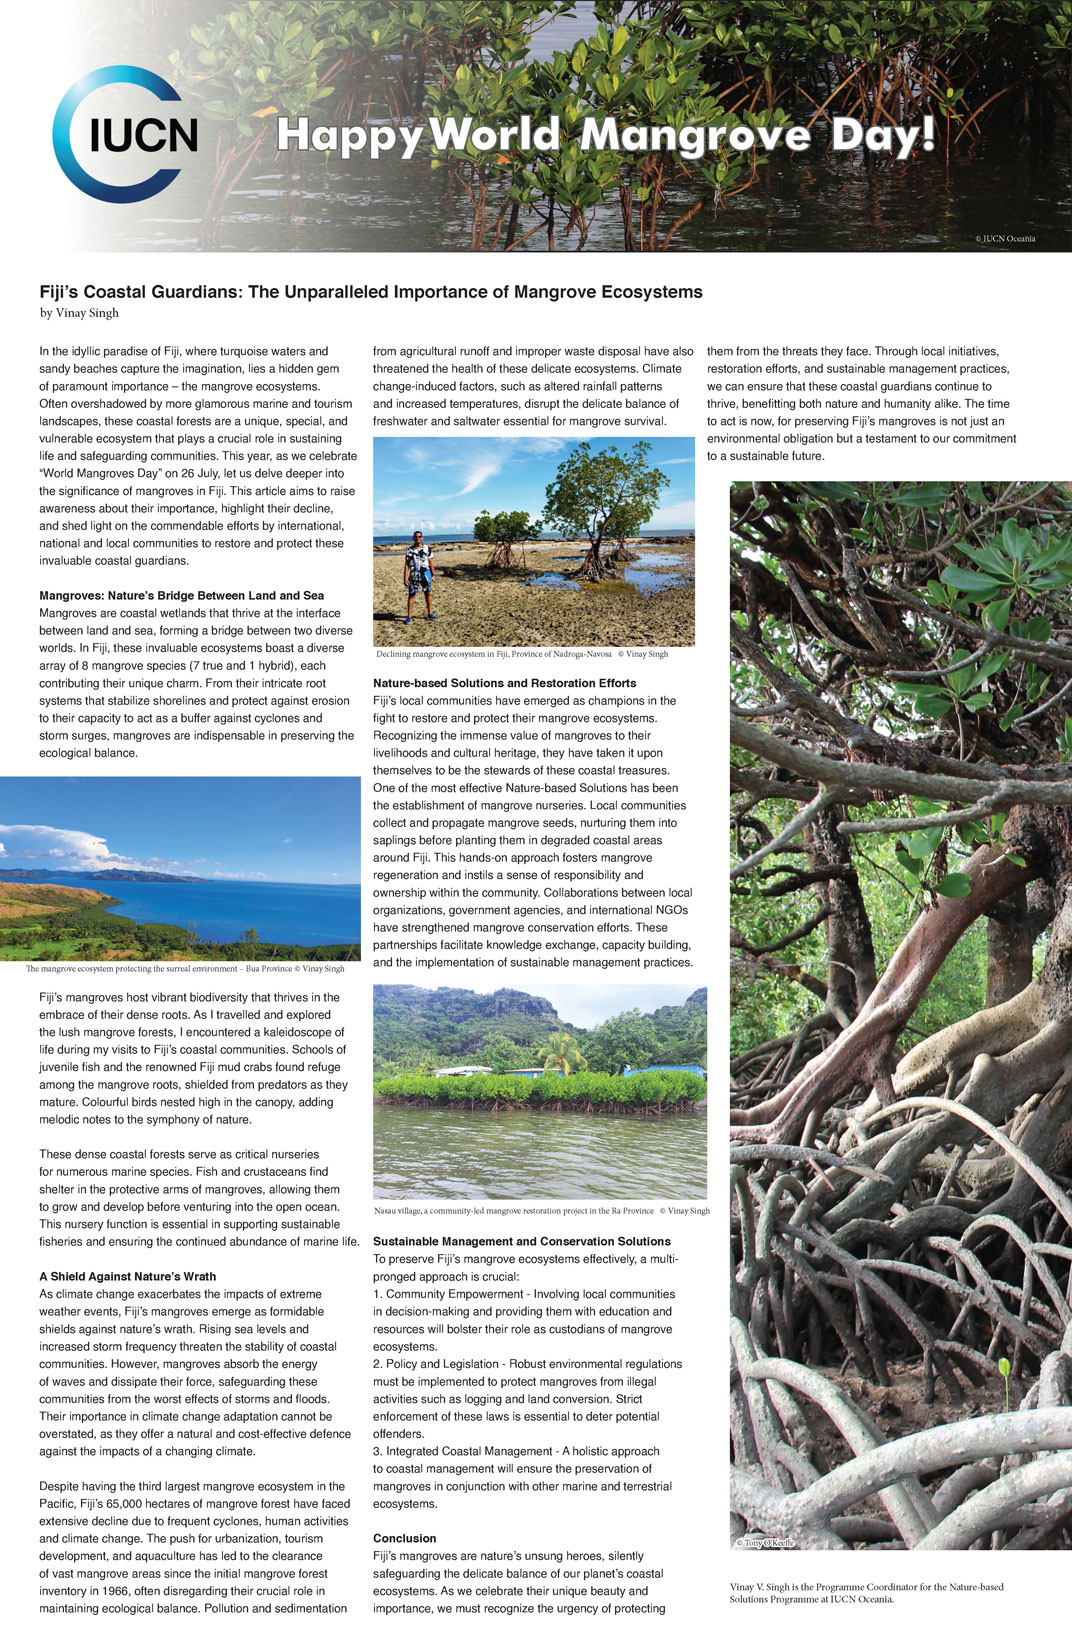 World Mangroves Day article by Vinay Singh